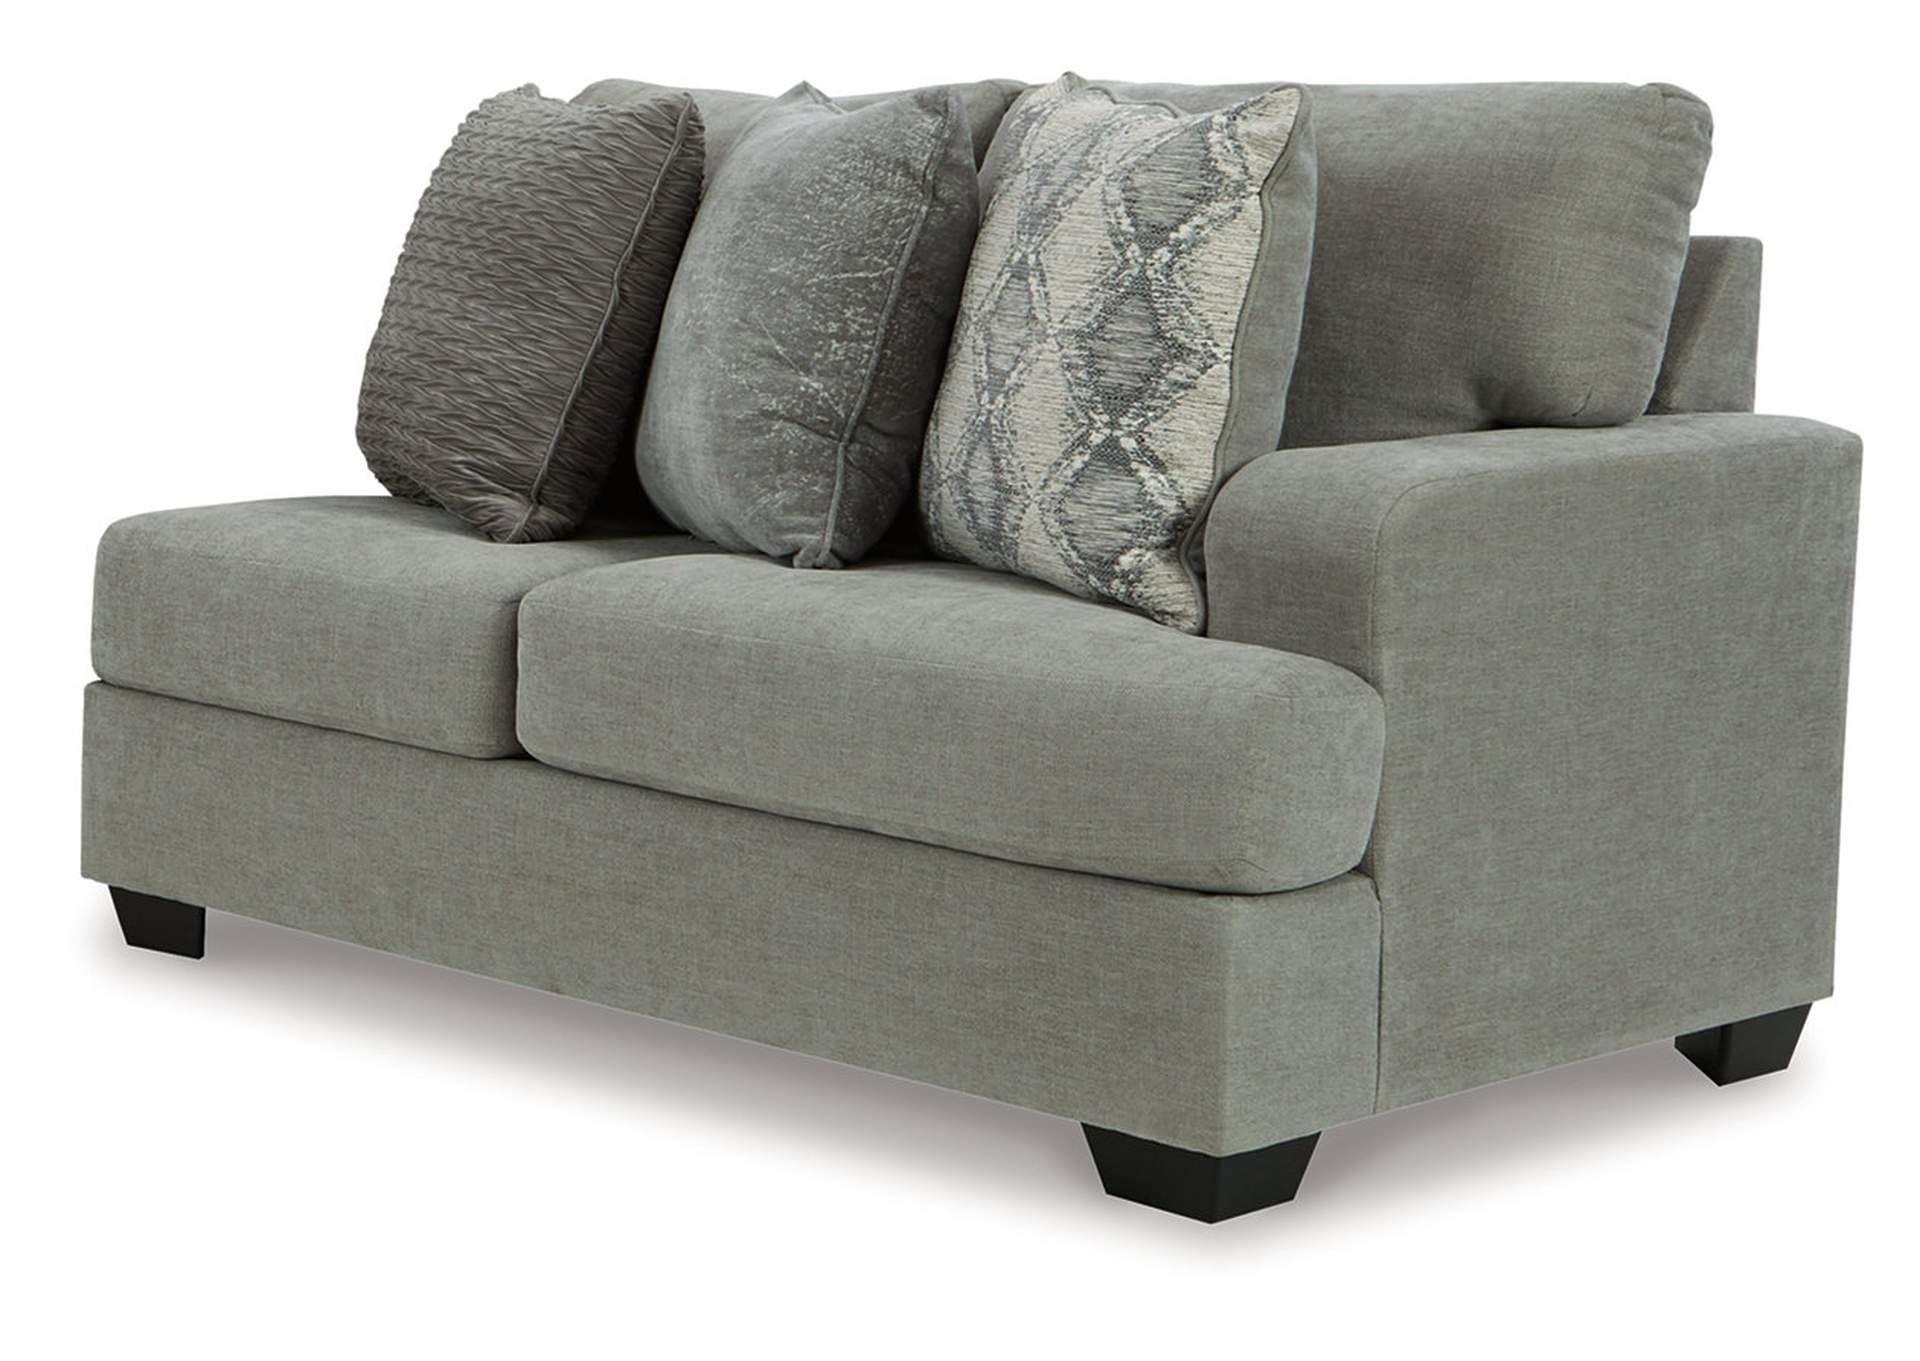 Keener 2-Piece Sectional with Chaise,Ashley